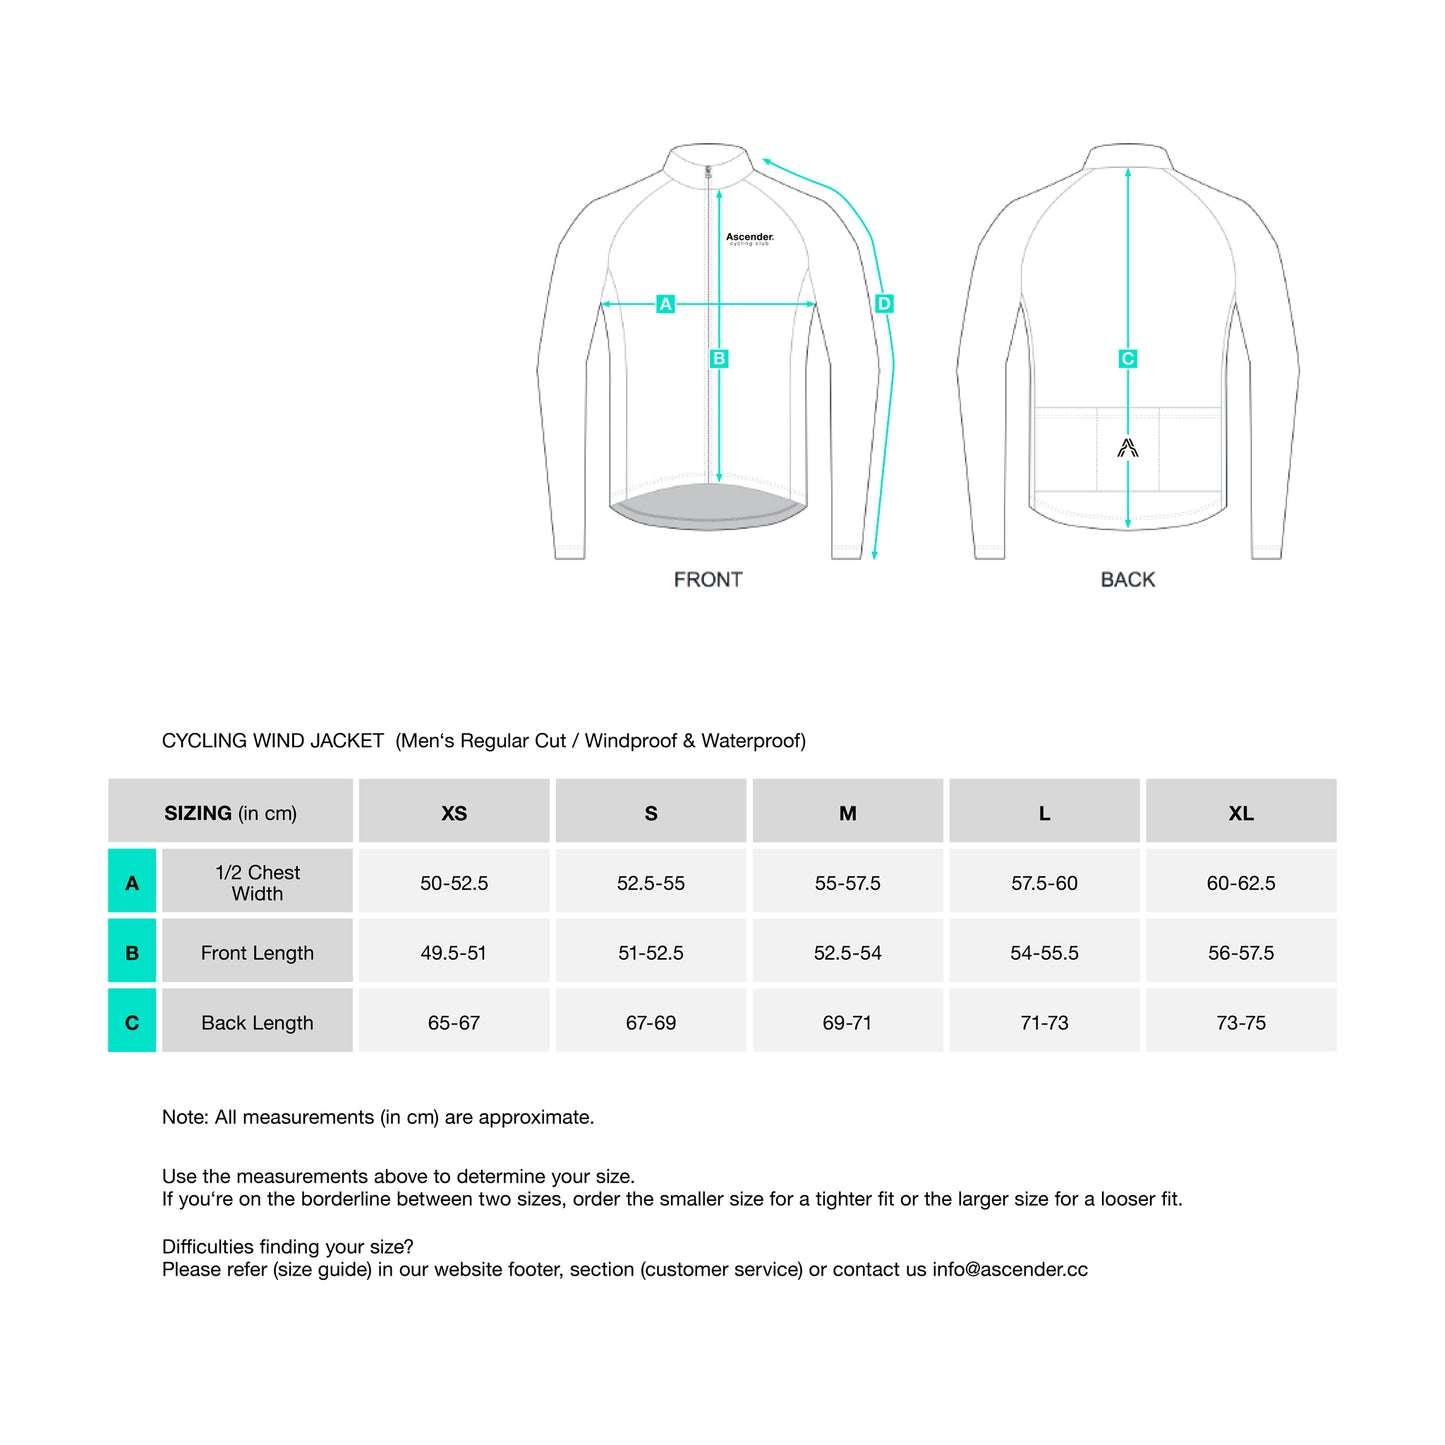 Aquarius Windproof and Waterproof Shield Jacket from Ascender Cycling Club in Zürich Switzerland Size Chart 2022